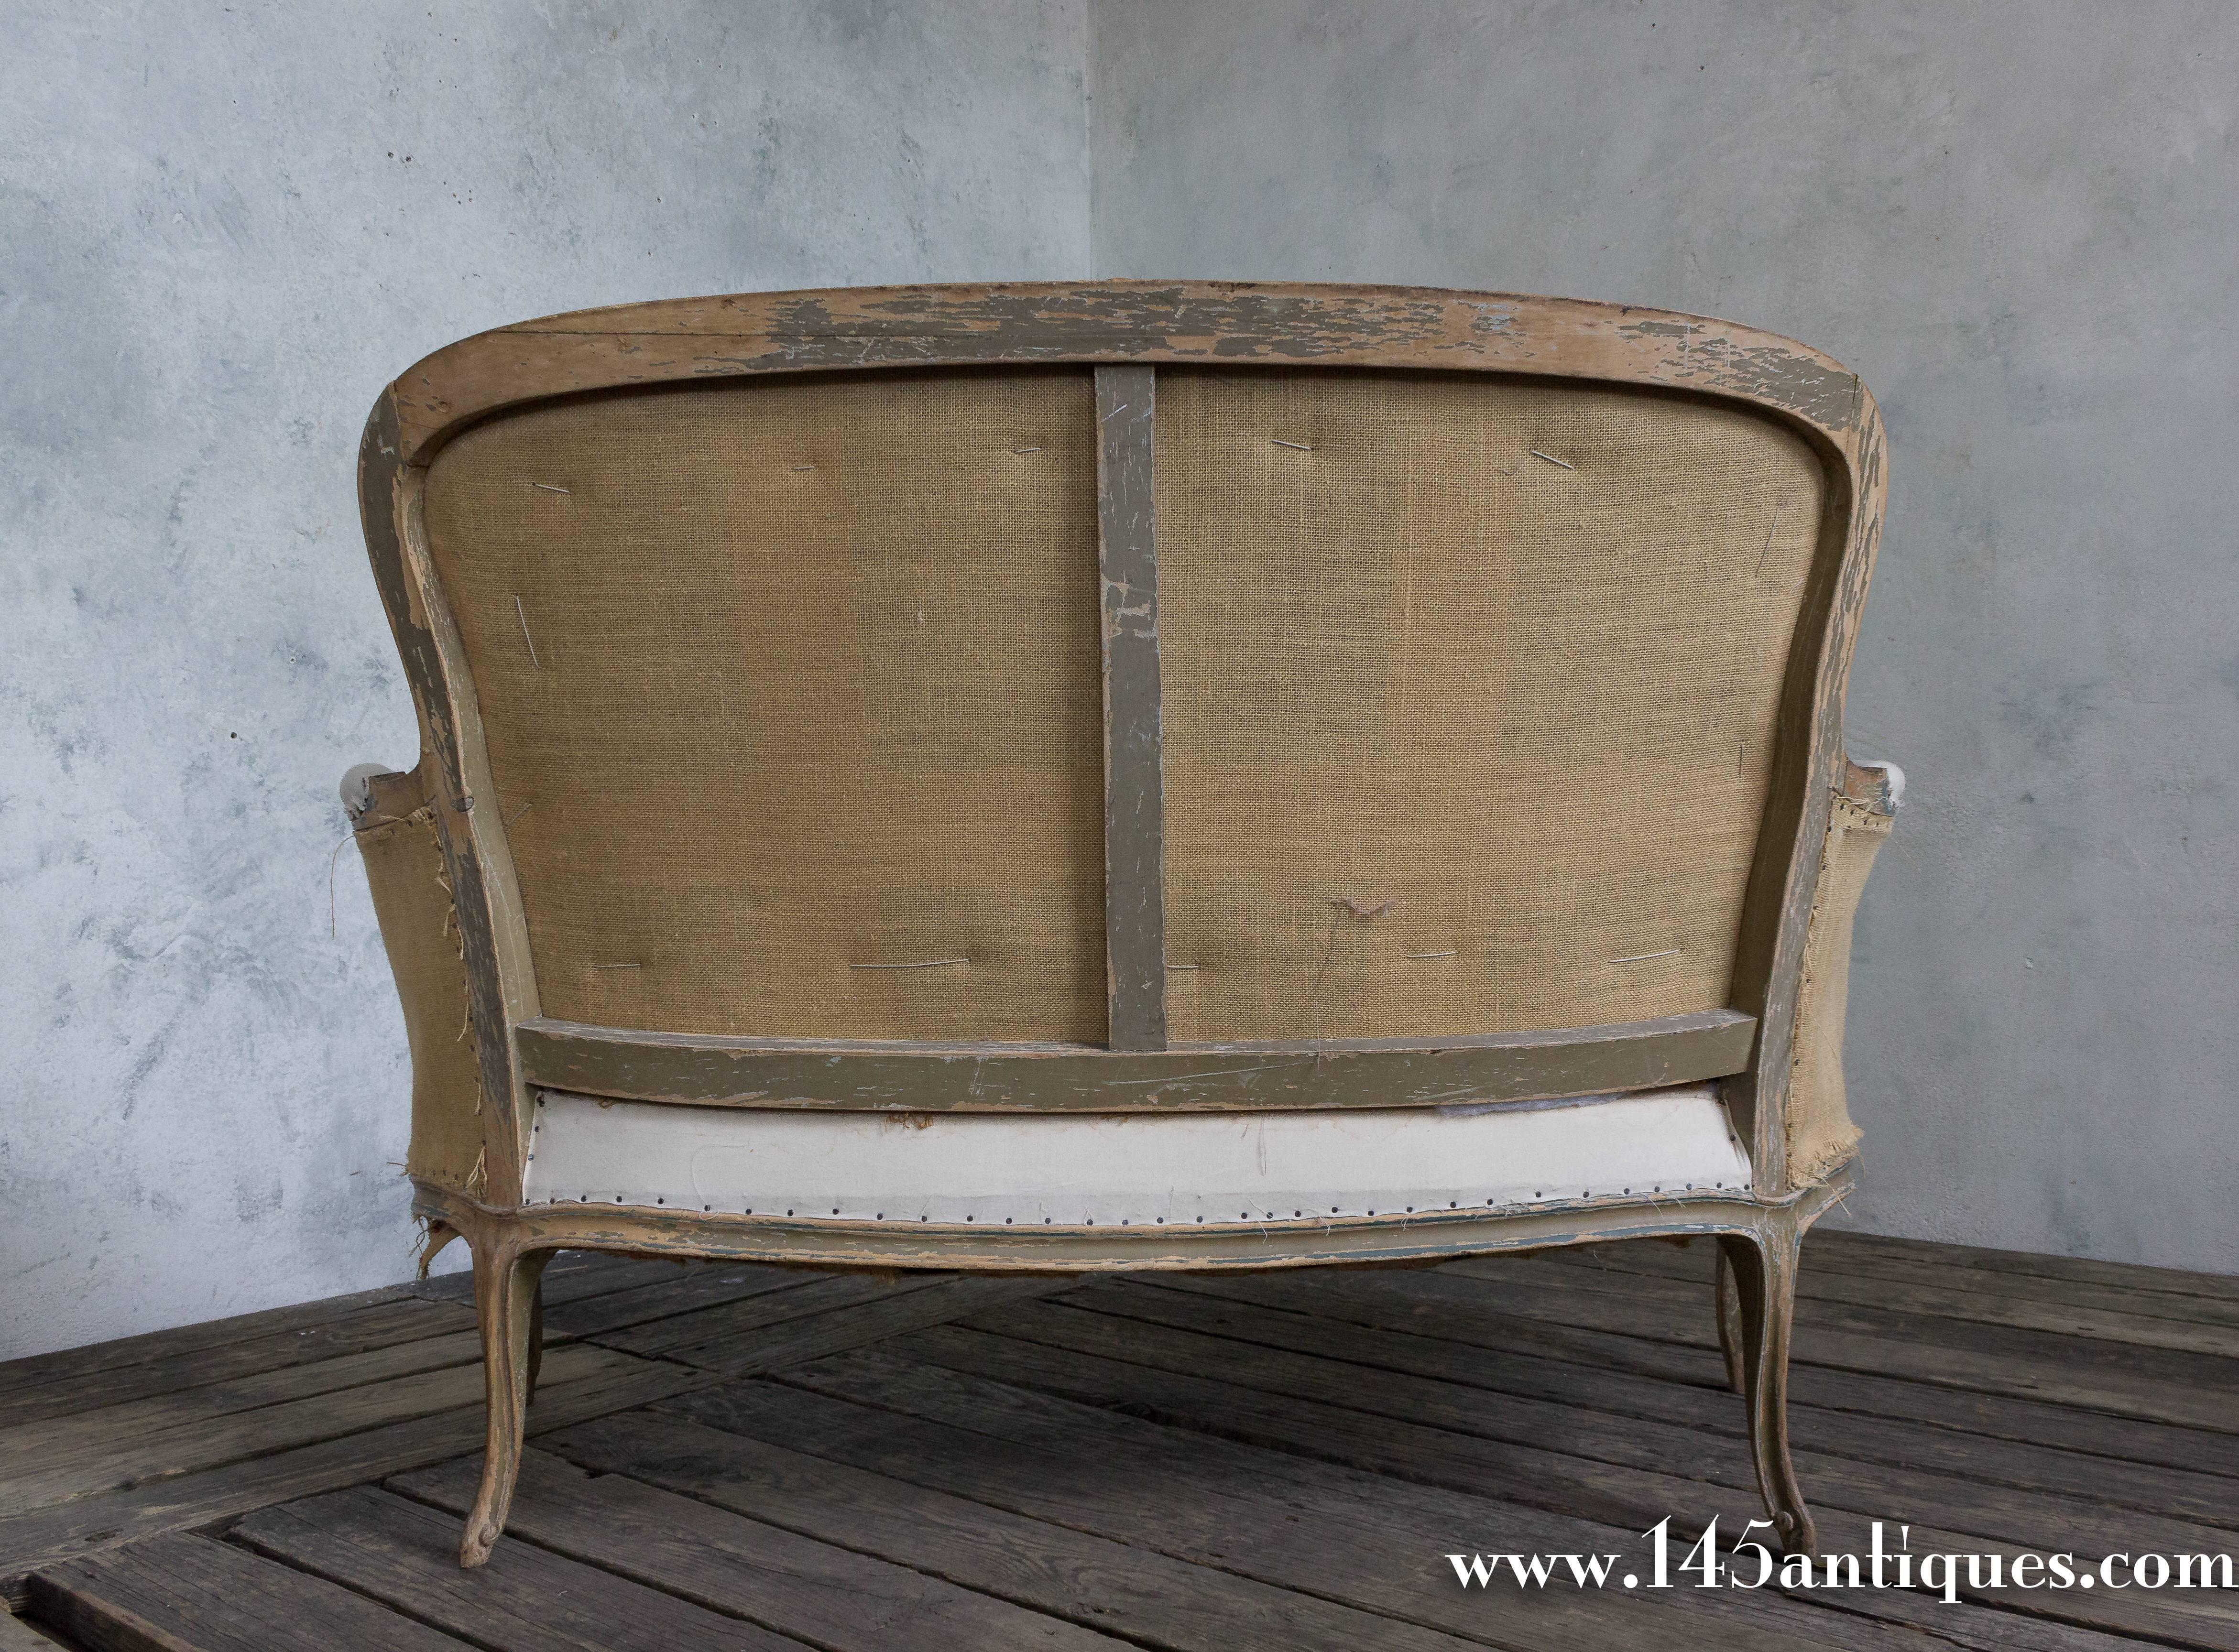 Muslin Small 19th Century Settee with Distressed Paint Finish